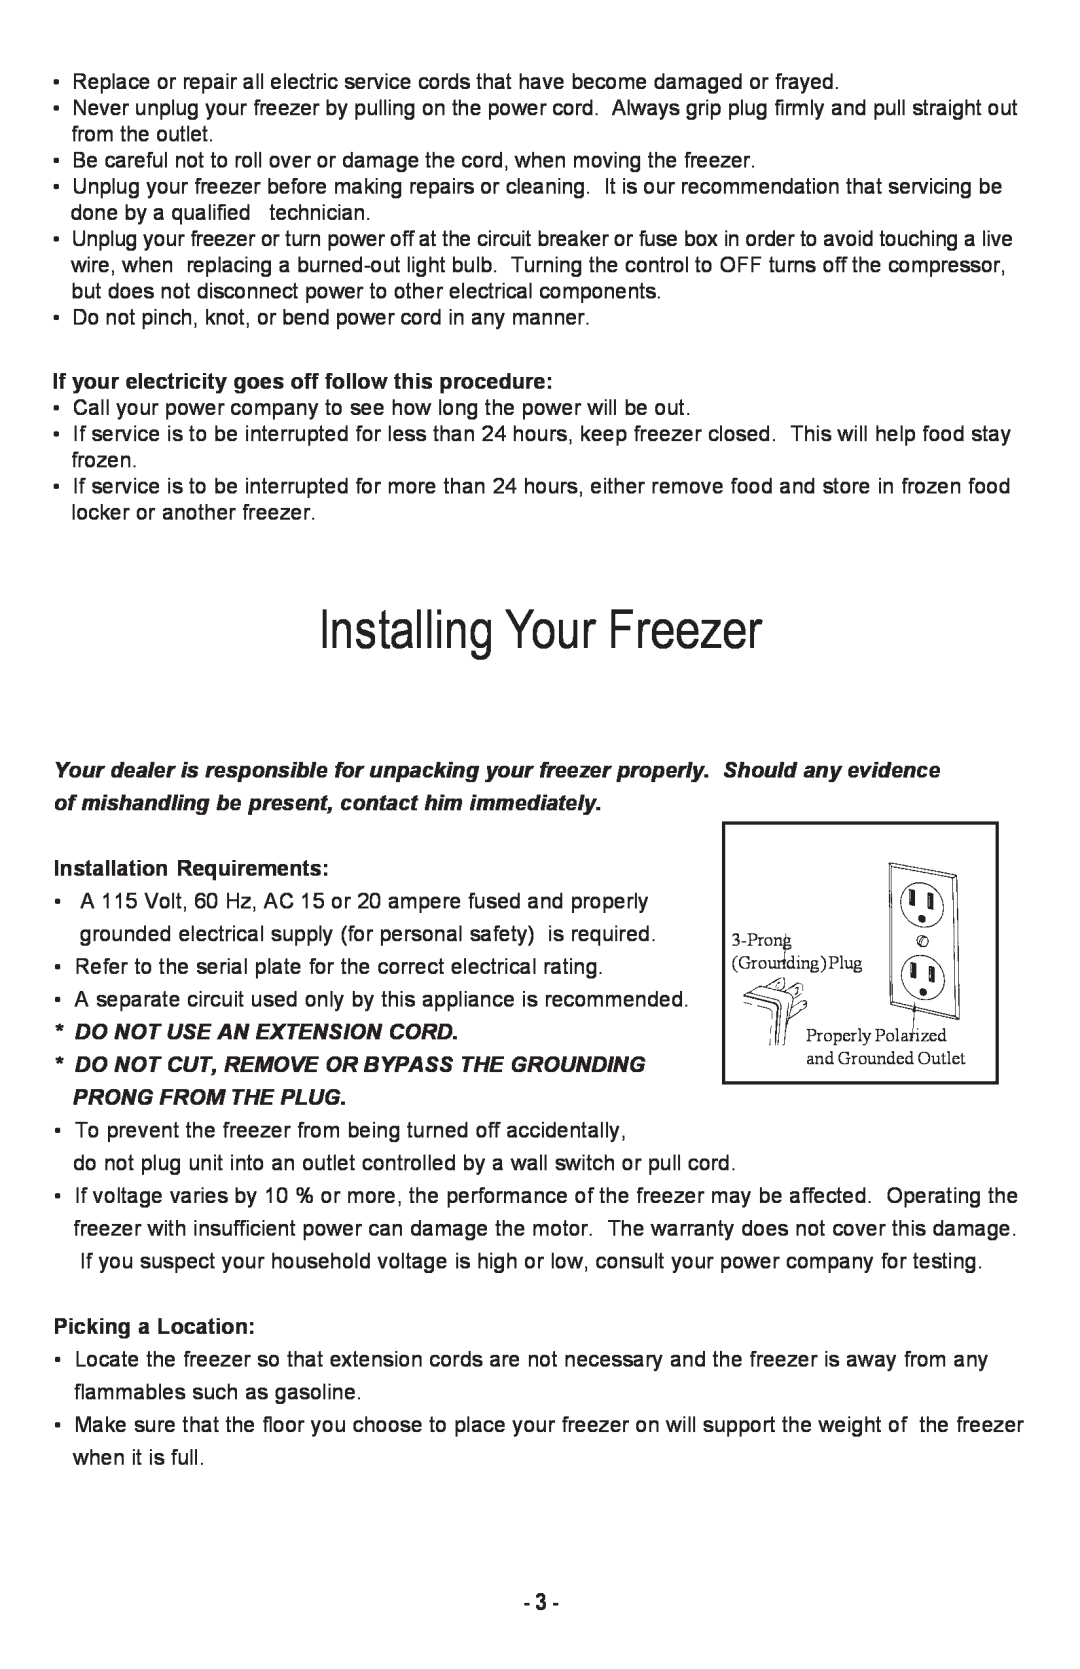 Danby DCF1014WE Installing Your Freezer, Installation Requirements, Do Not Use An Extension Cord, Prong From The Plug 